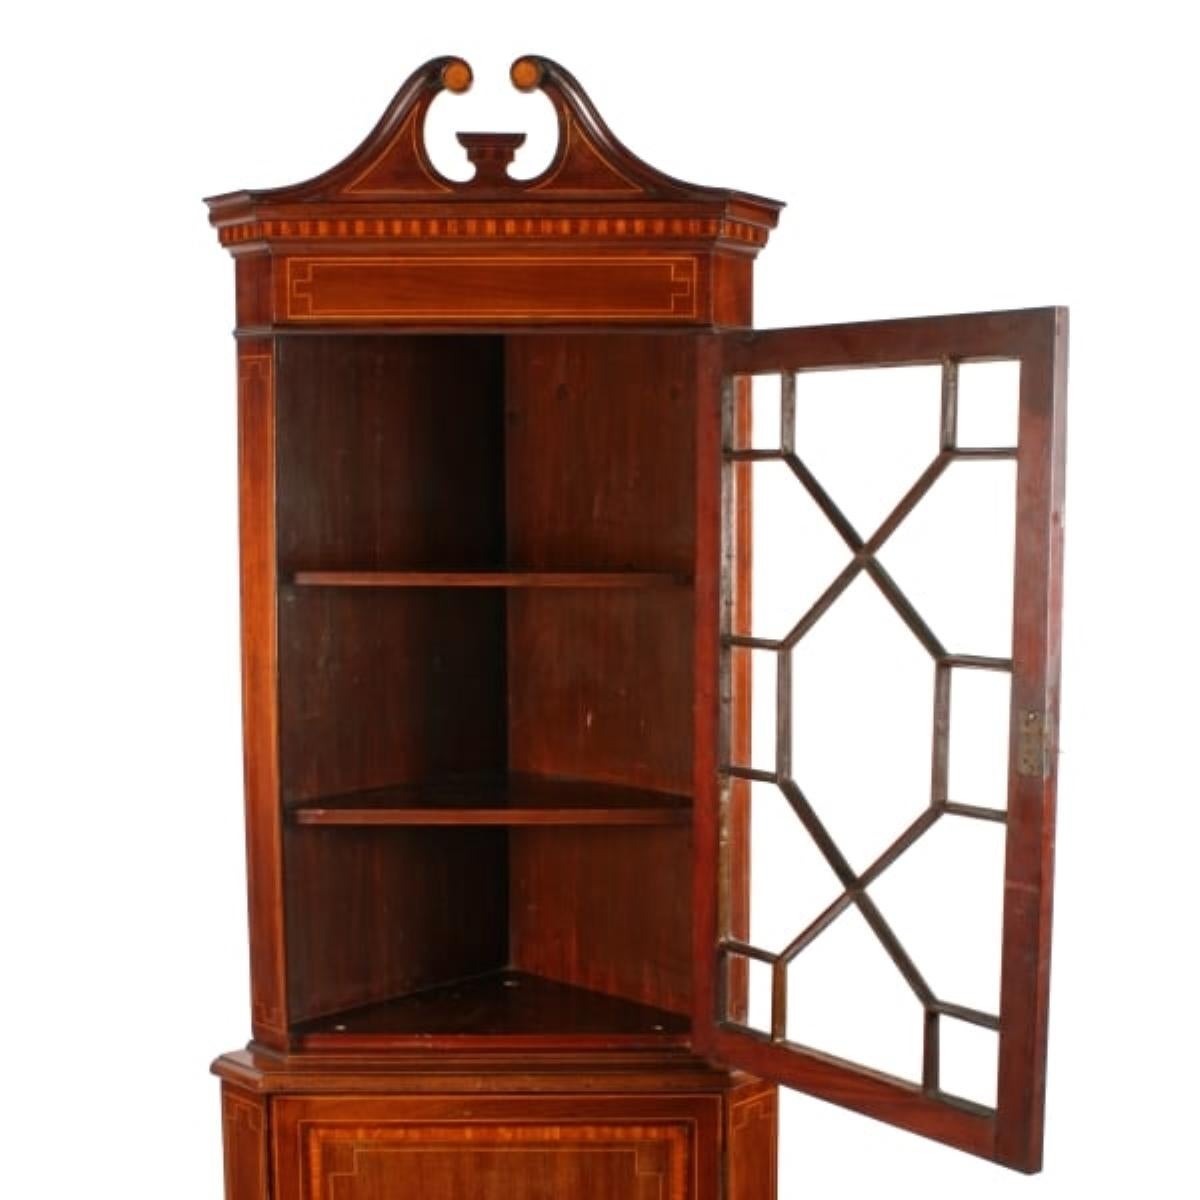 Mahogany Edwardian Inlaid Double Corner Cabinet, Early 20th Century For Sale